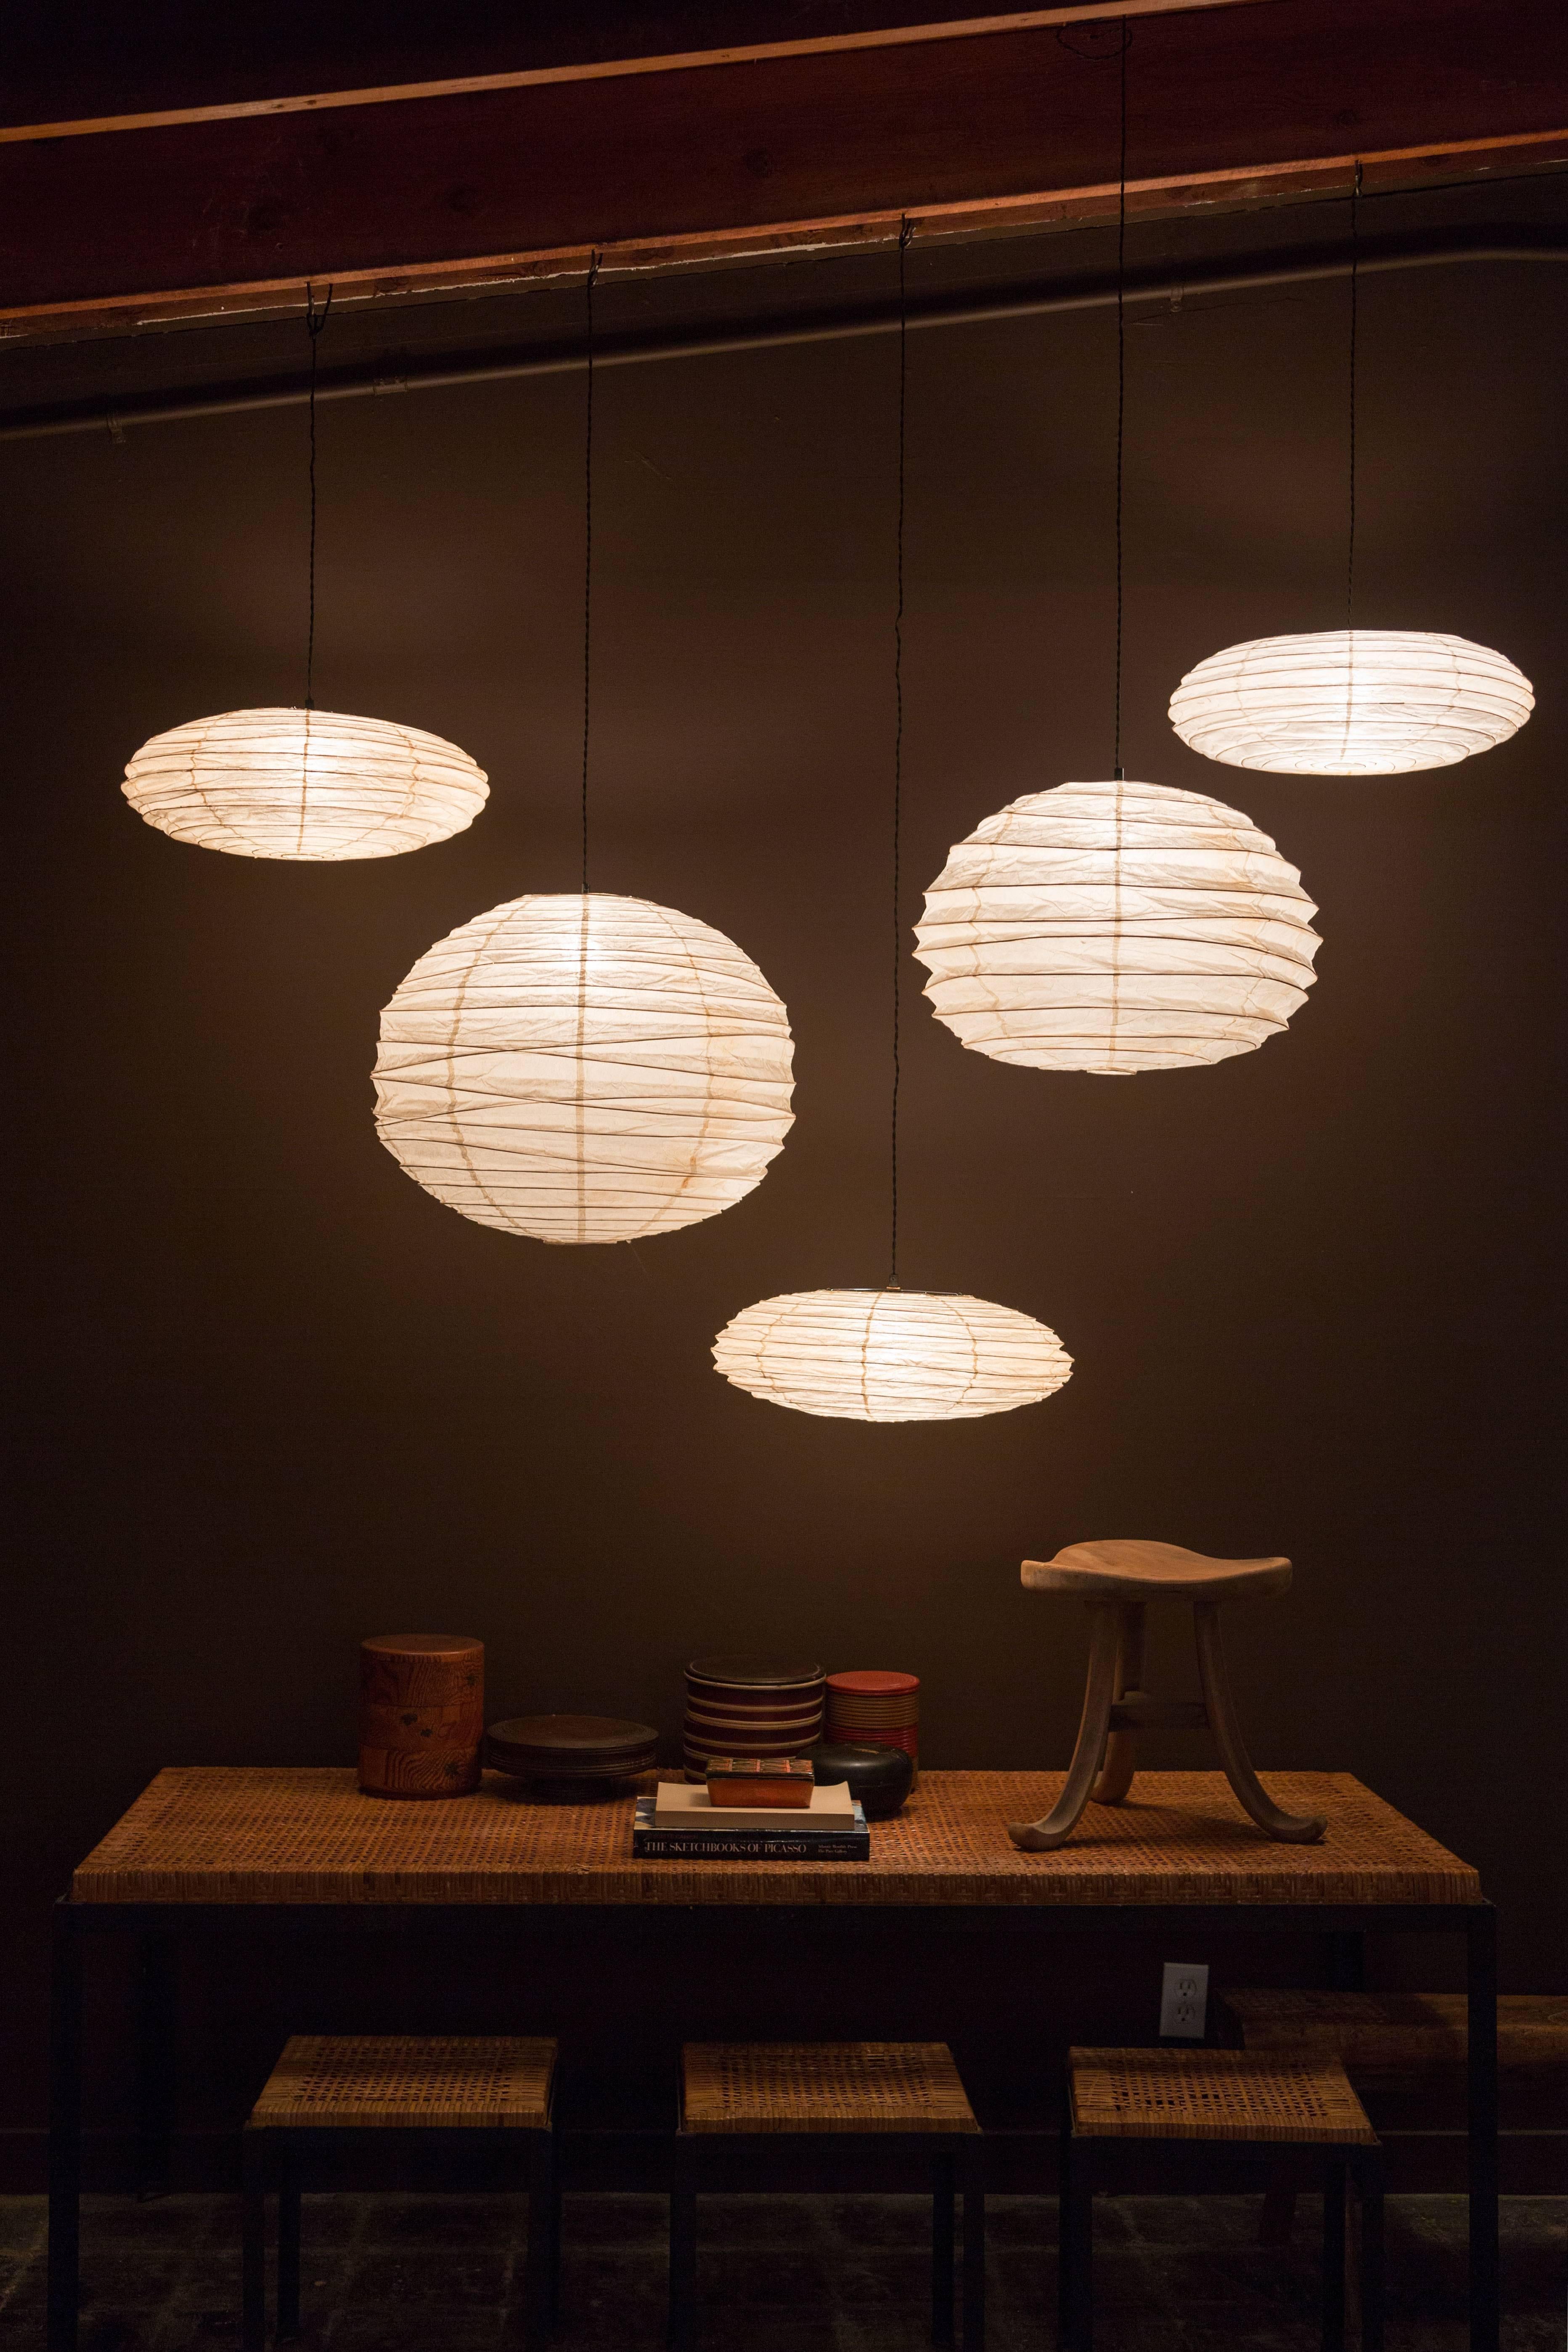 Designed by Noguchi and handmade for over a half century by the original manufacturer in Gifu, Japan, the paper lanterns are a blend of Japanese handcraft and modernist form. The lamps are created from handmade washi paper and bamboo ribbing,